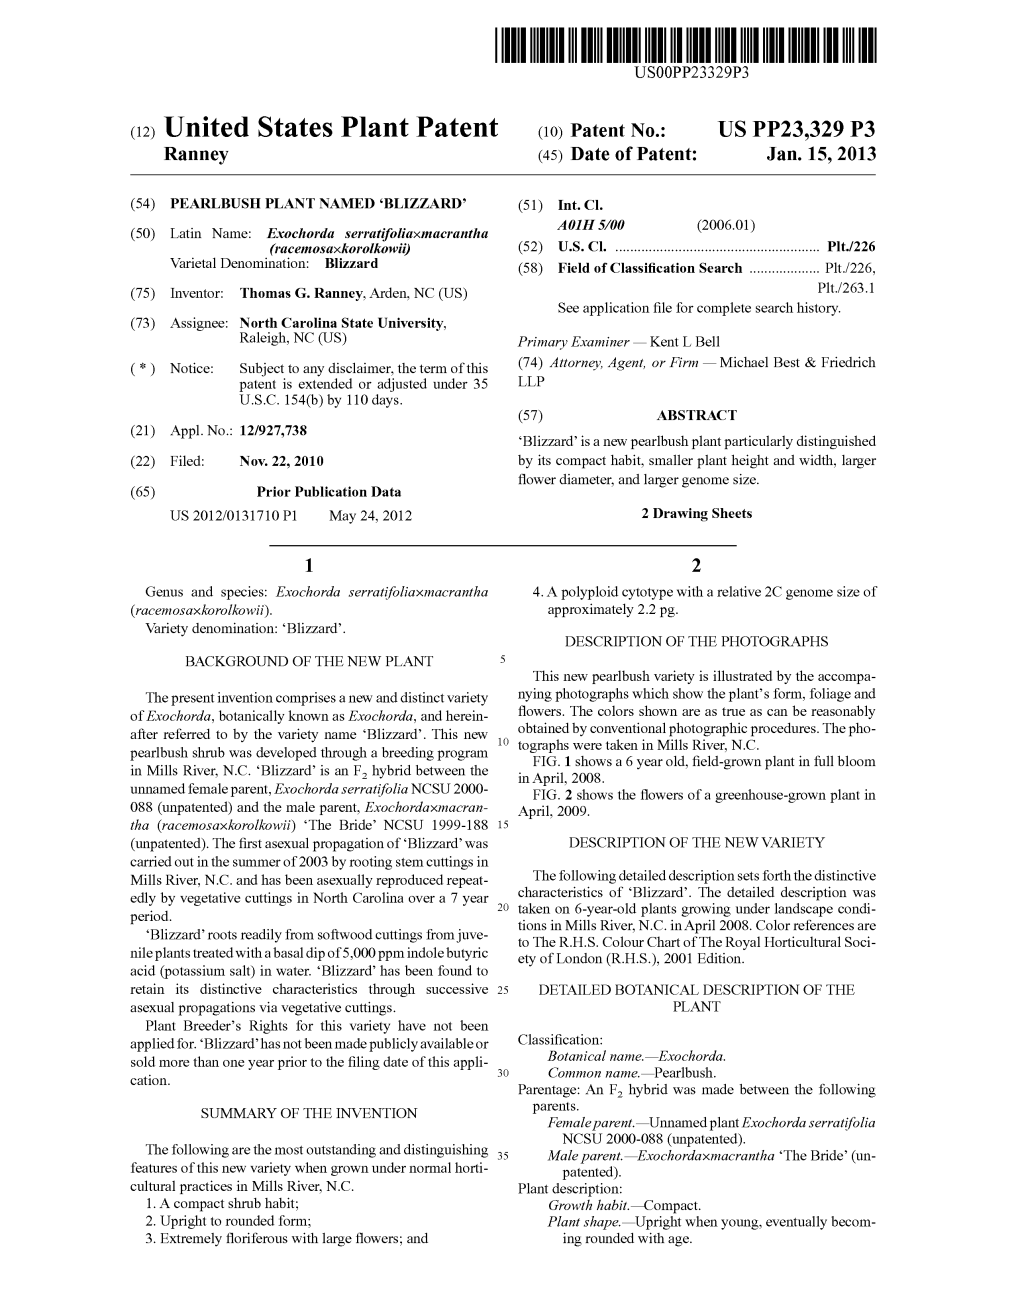 (12) United States Plant Patent (10) Patent No.: US PP23,329 P3 Ranney (45) Date of Patent: Jan